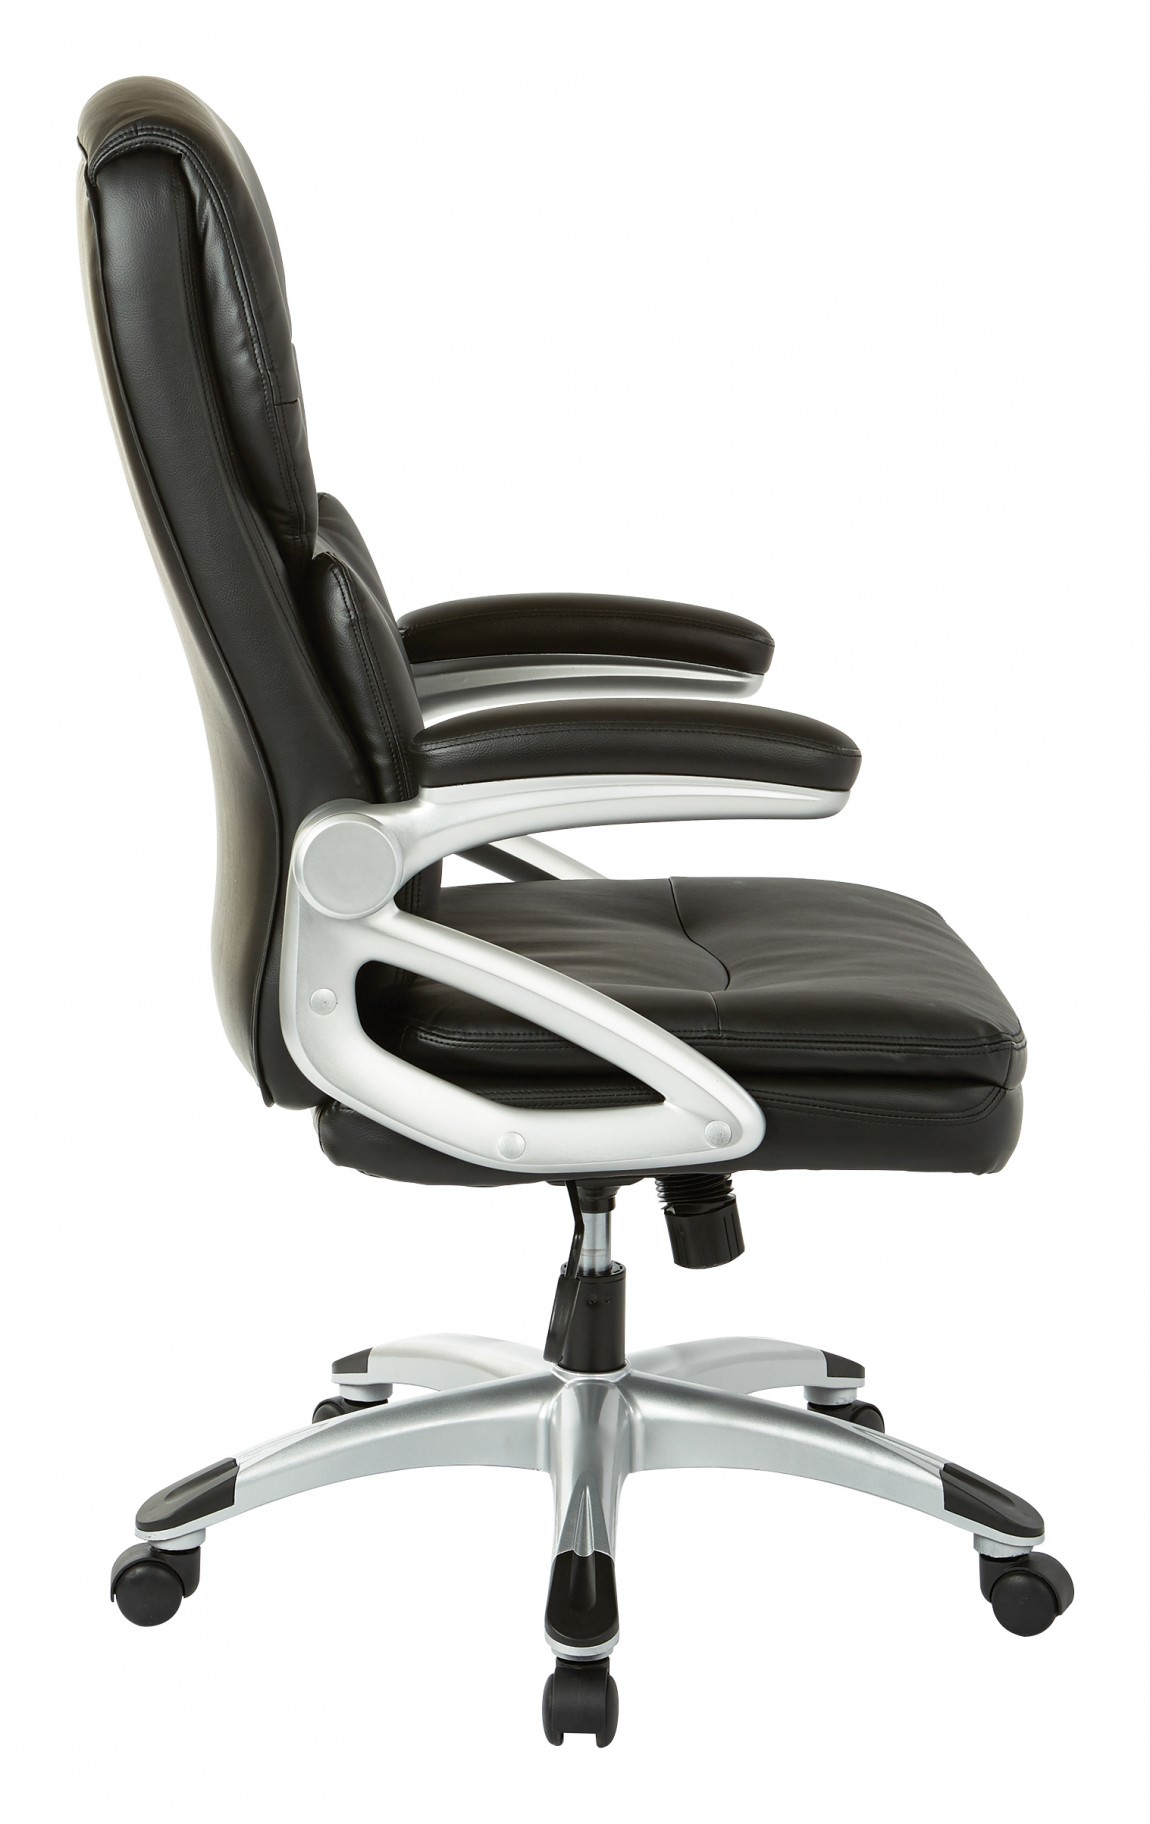 Two-Tone Executive Leather Chair